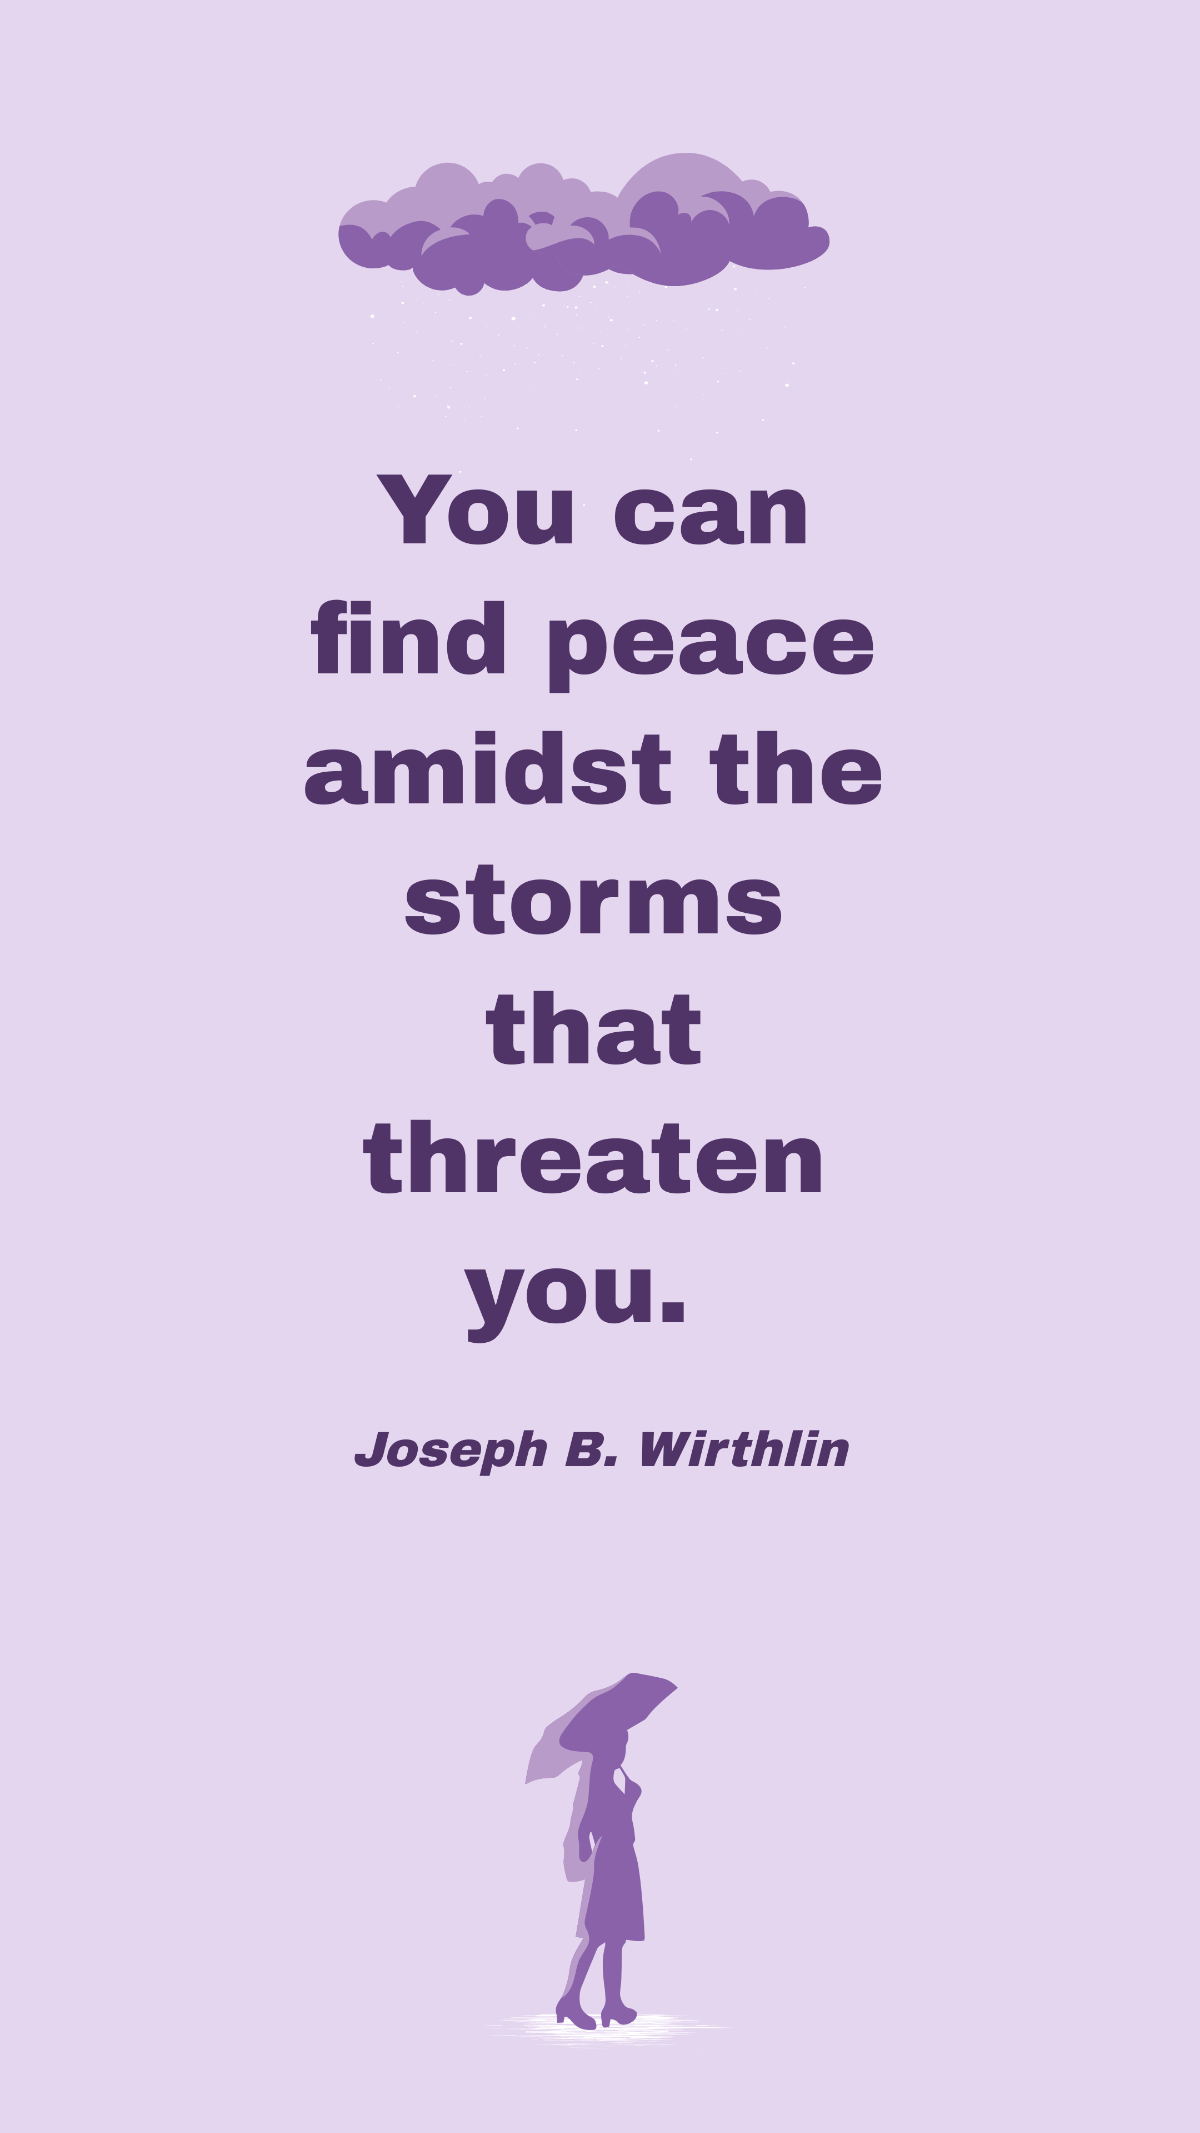 Free Joseph B. Wirthlin - You can find peace amidst the storms that threaten you. Template